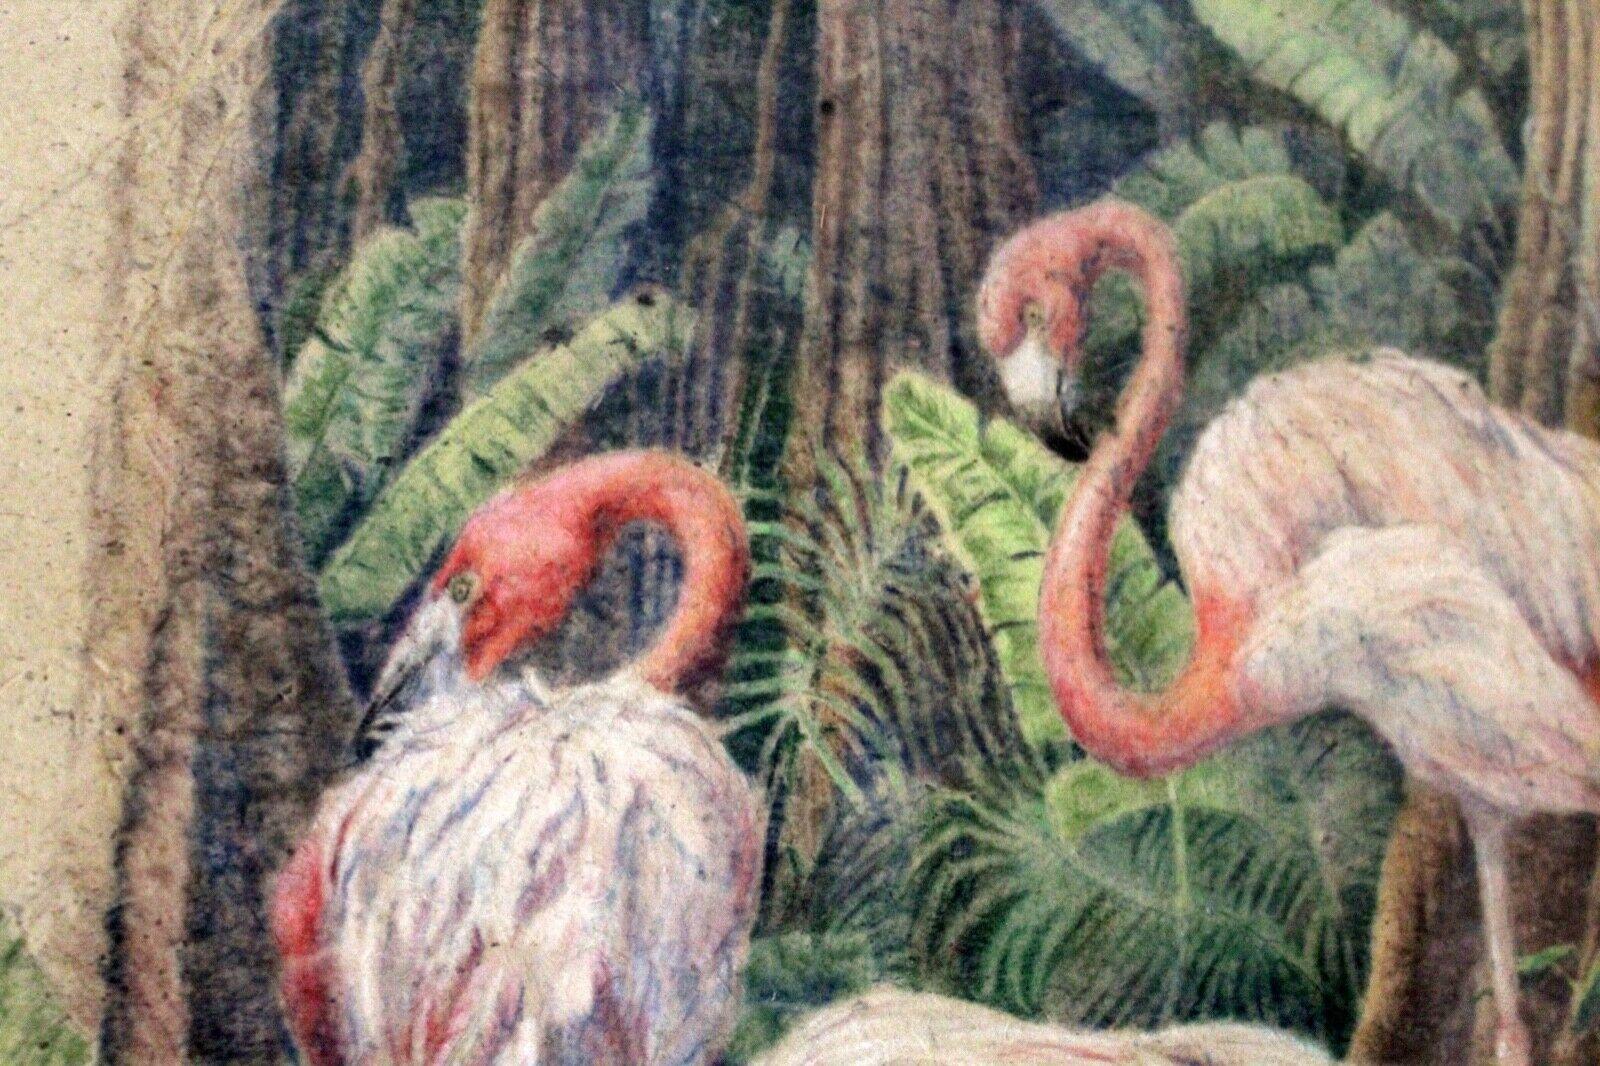 Three flamingos stopping for a drink of water, drawn in with precision by artist Nancy Strailey. Nancy pays special attention to the surroundings and detail. The artist draws with colored pencils on a piece of parchment paper hand picked by the